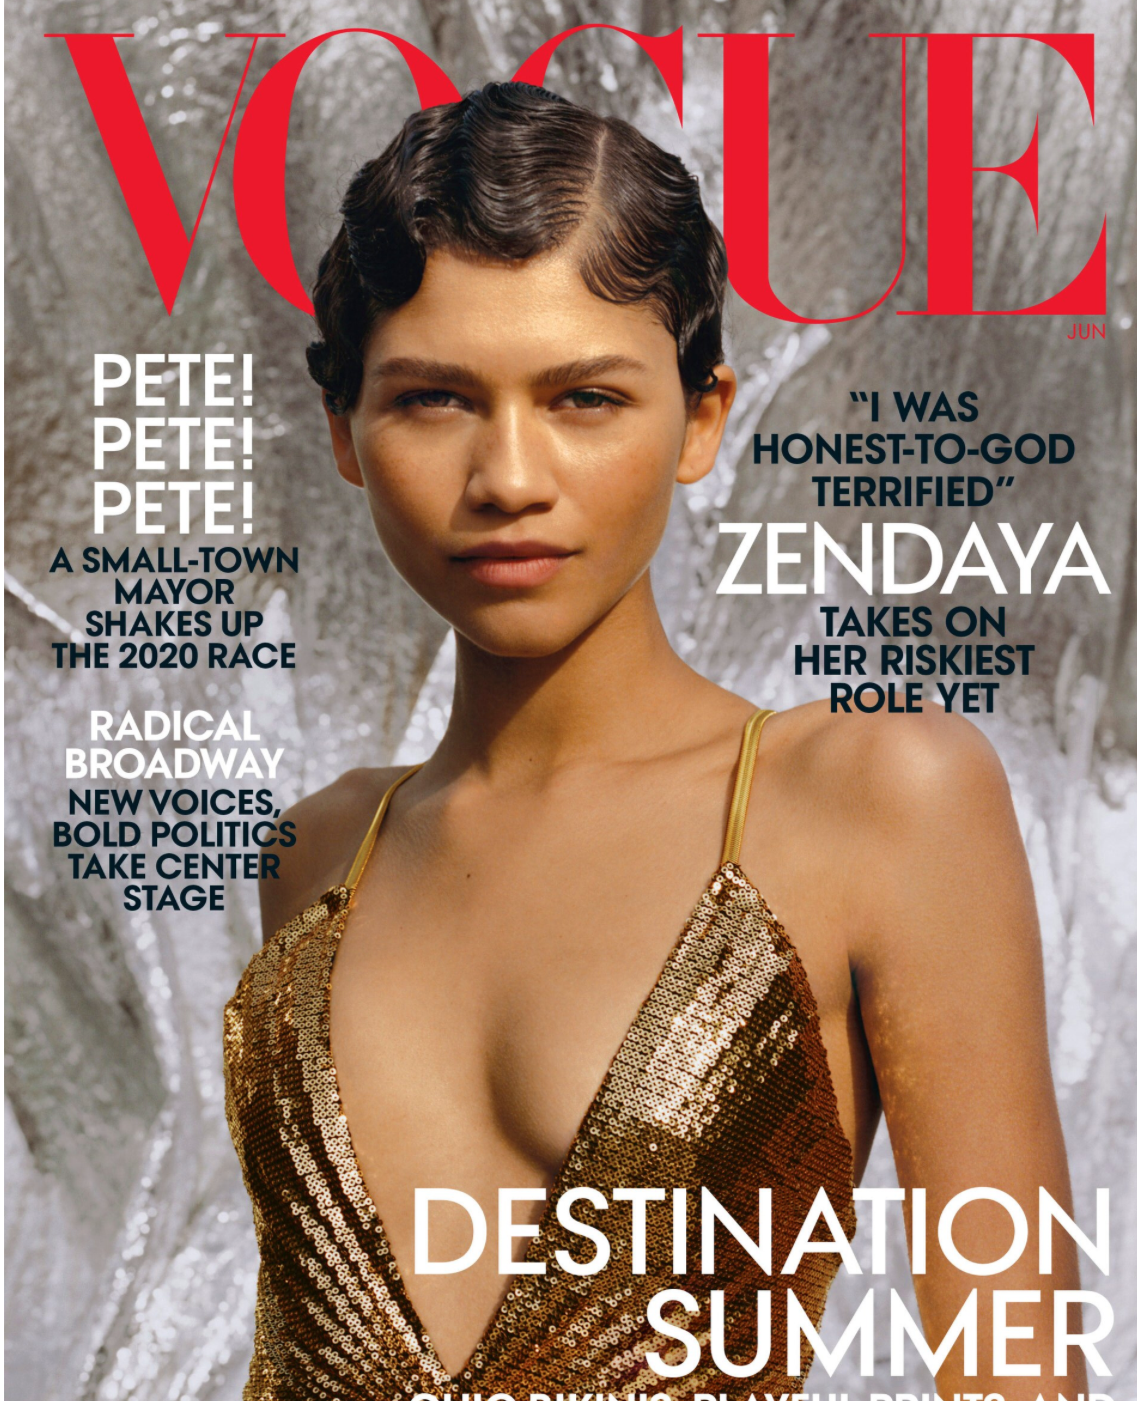 Zendaya by Tyler Mitchell for Vogue US June 2019 (1).png